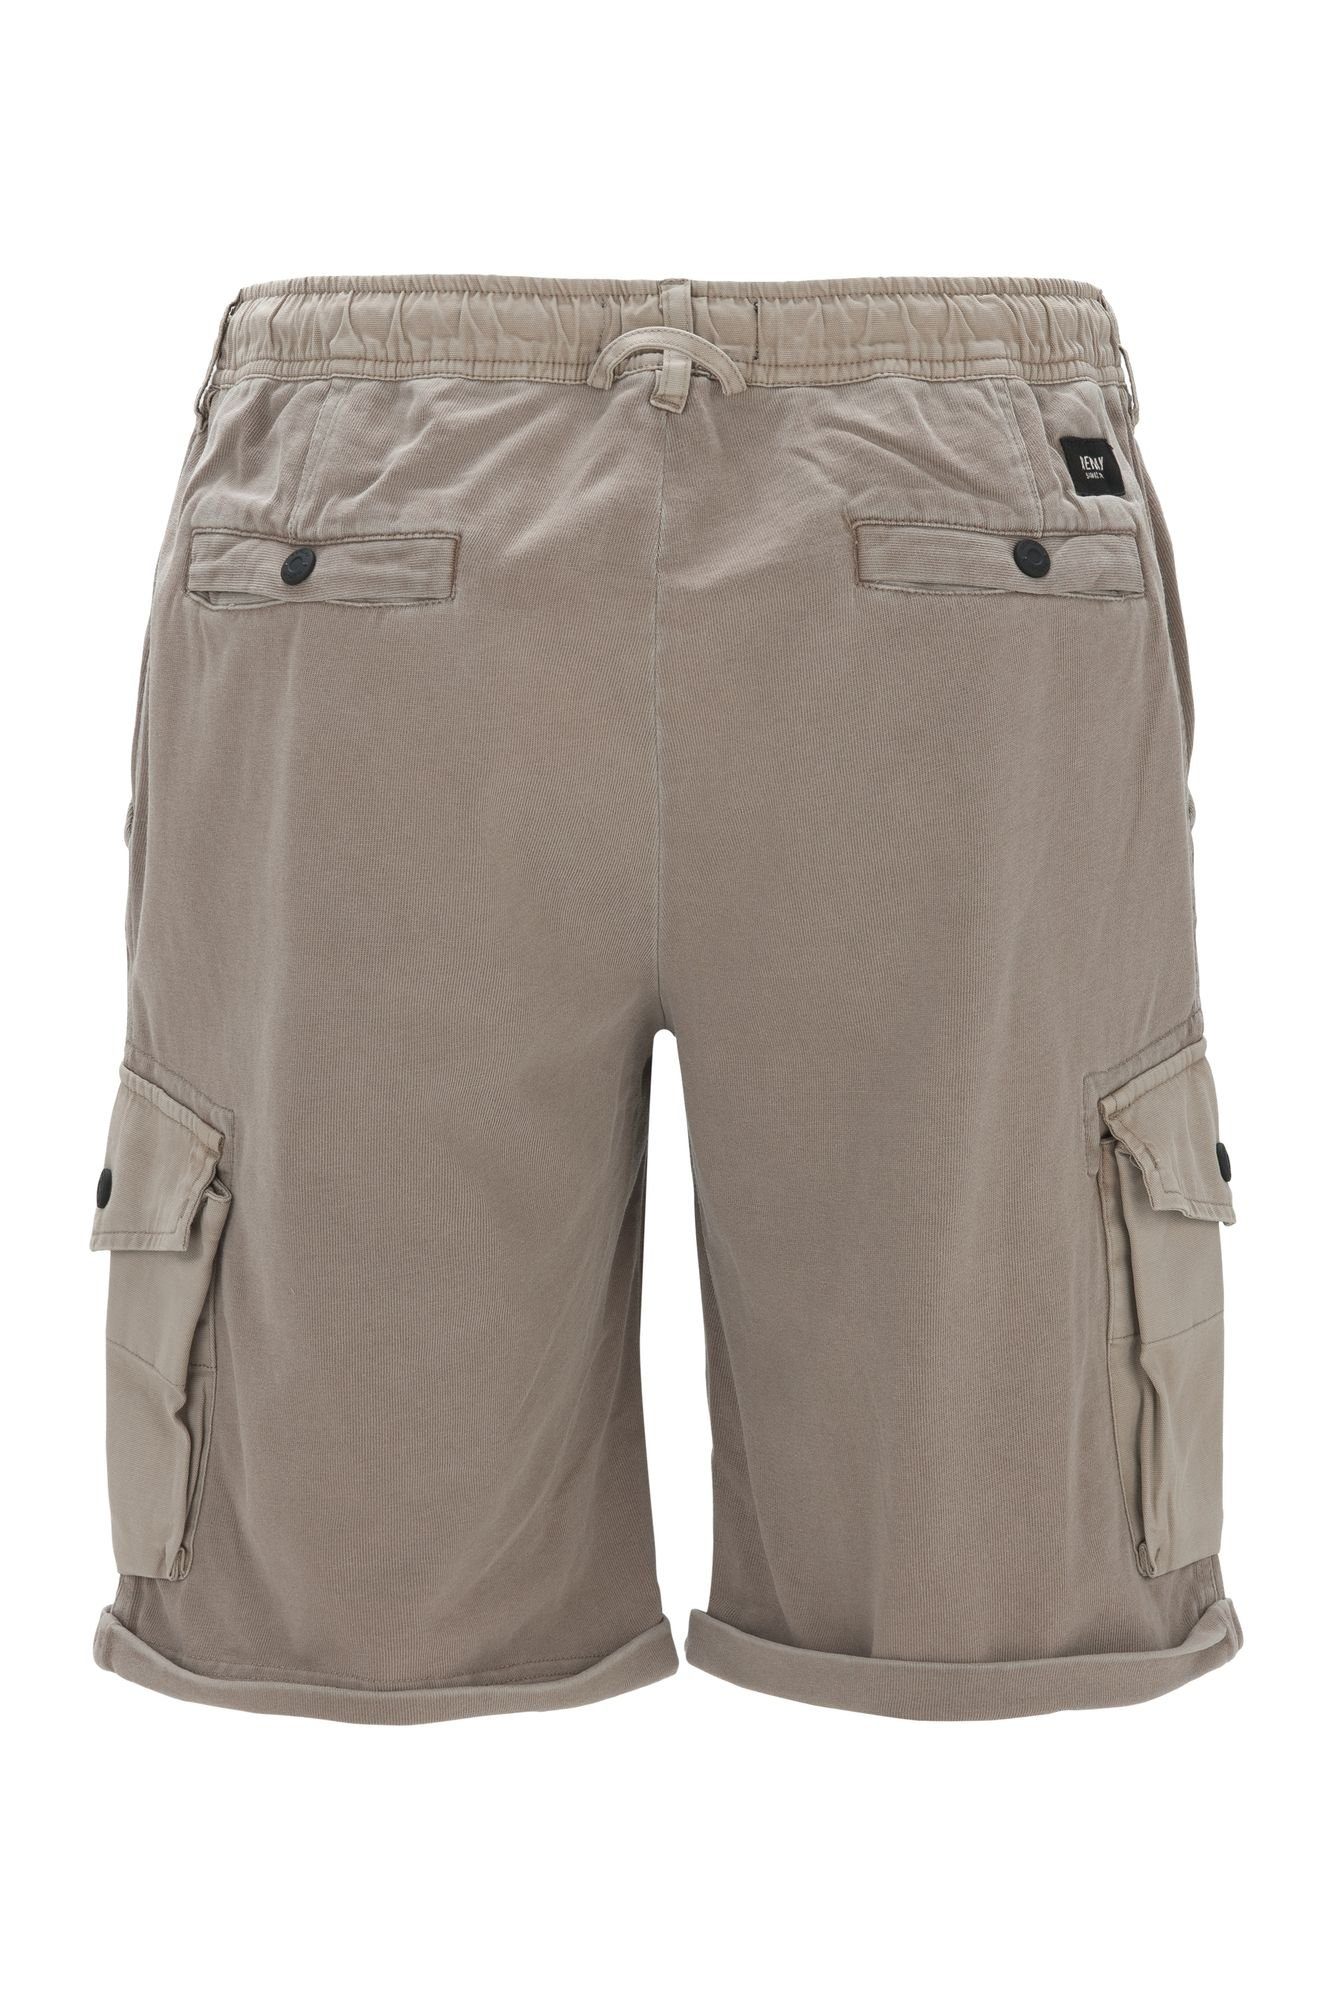 HEAVY JERSEY COTTON DYED Replay Cargoshorts GARMENT